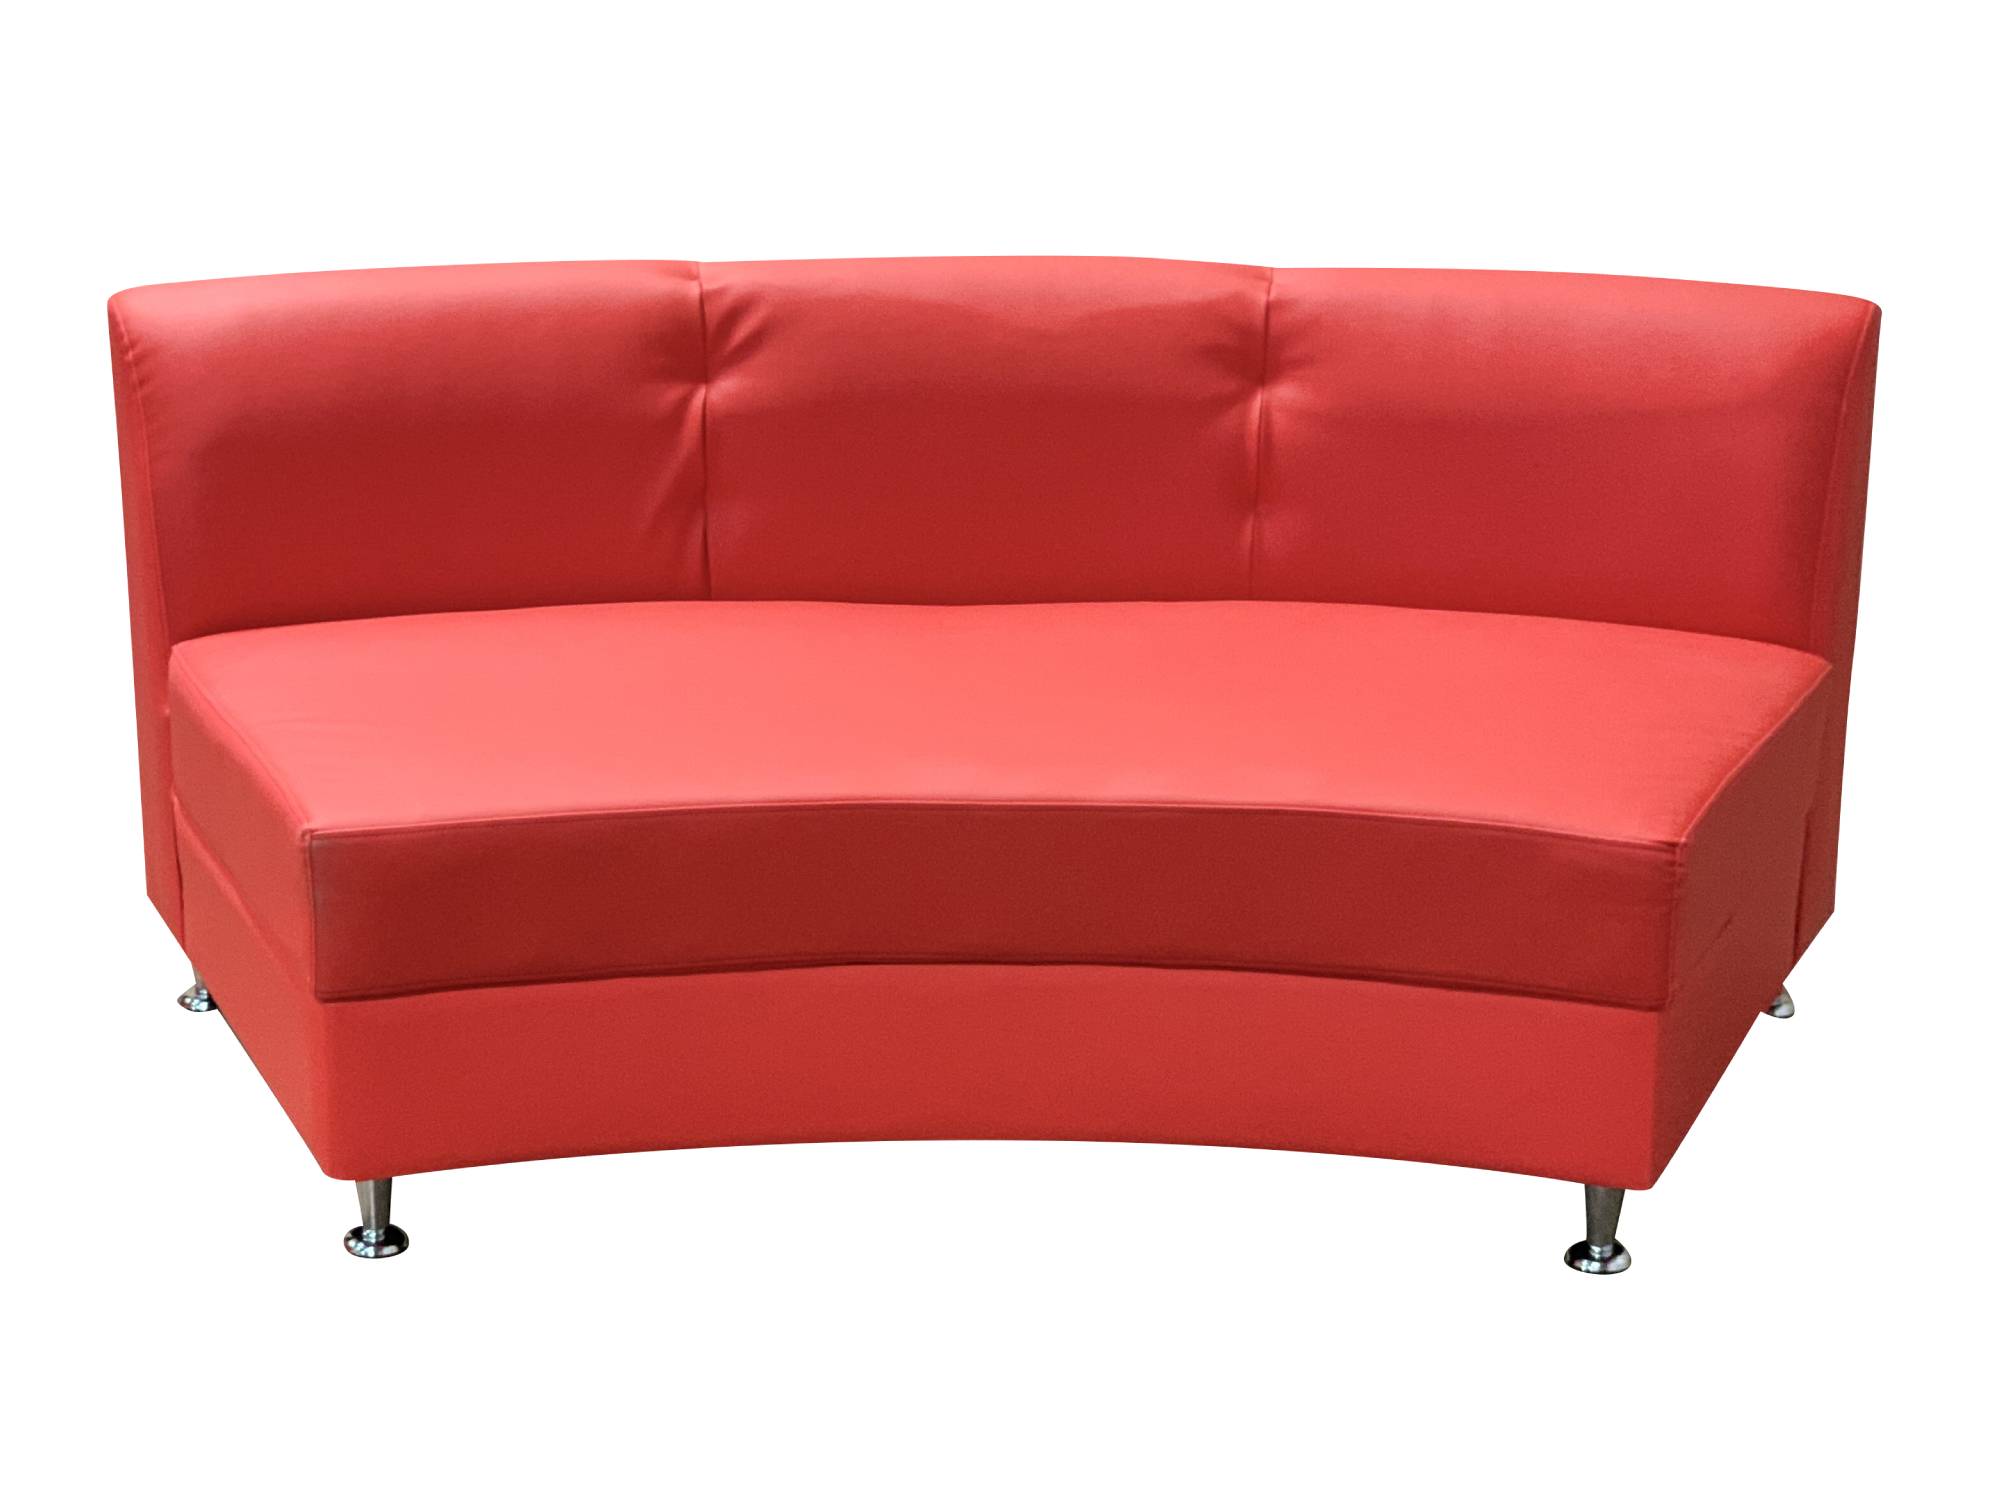 LUXURY ARMLESS SOFA SECTION - RED